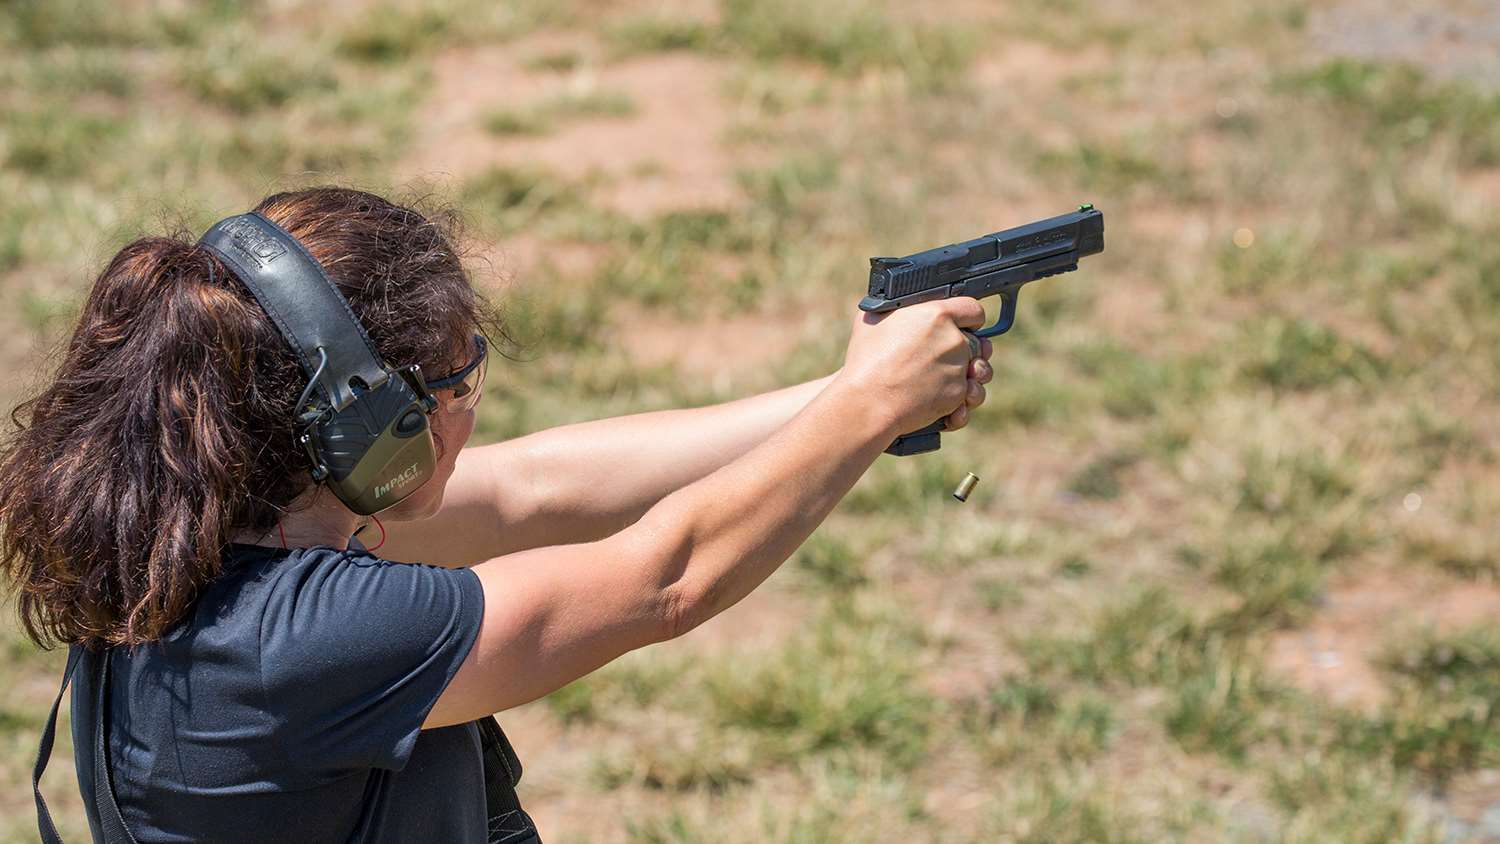 TPC competition with duty pistol